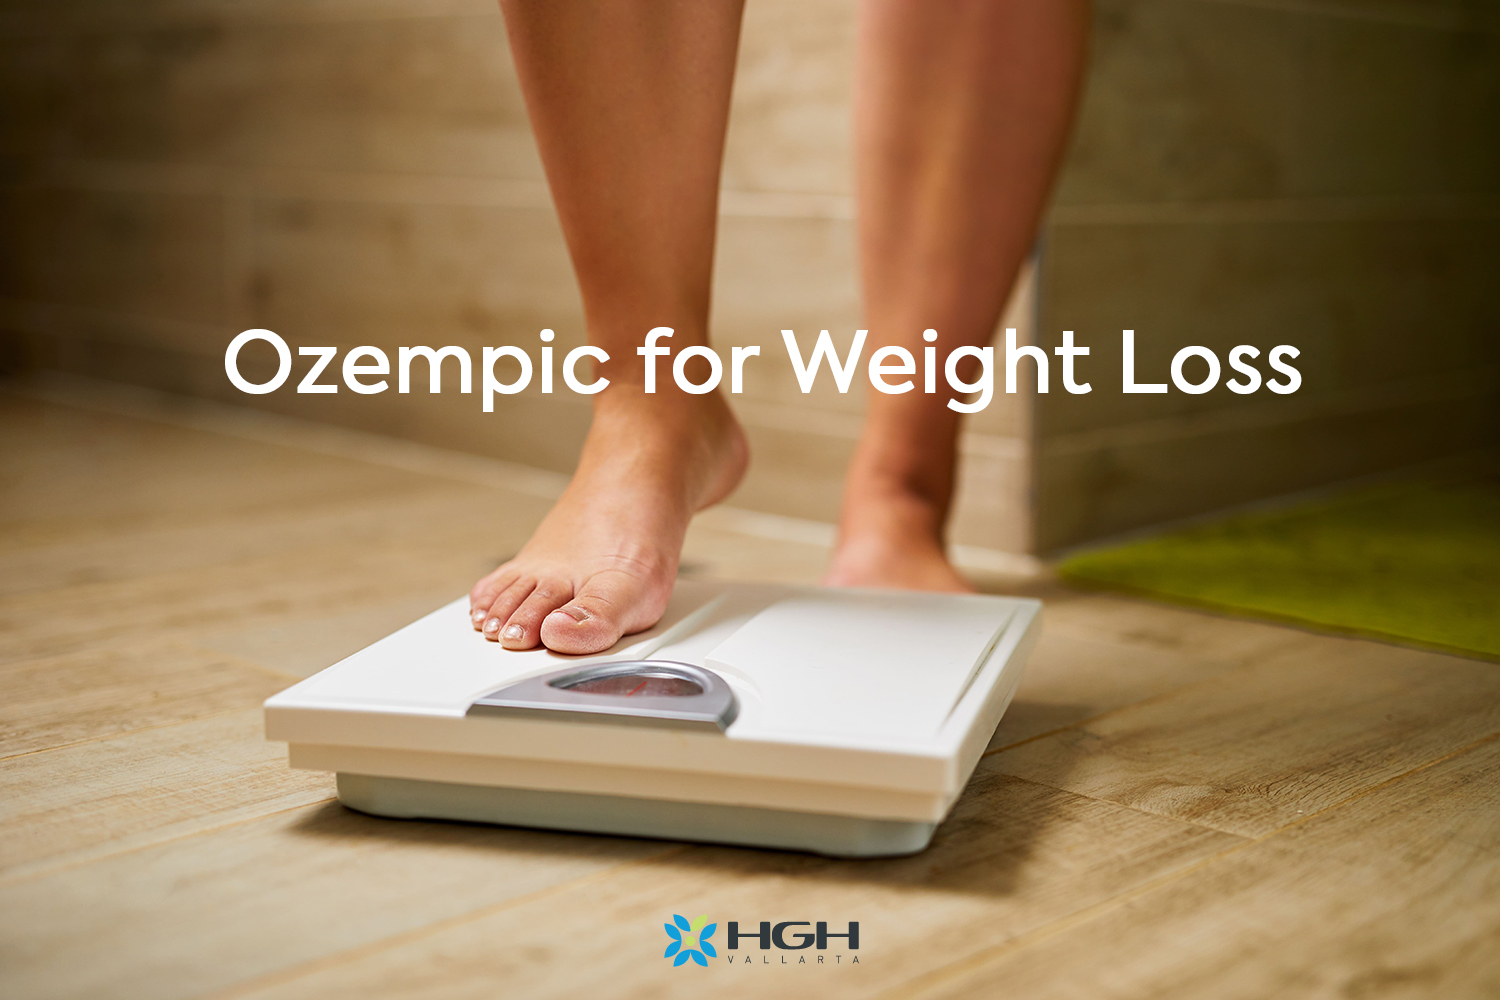 Ozempic for weight loss on image of person stepping on scale